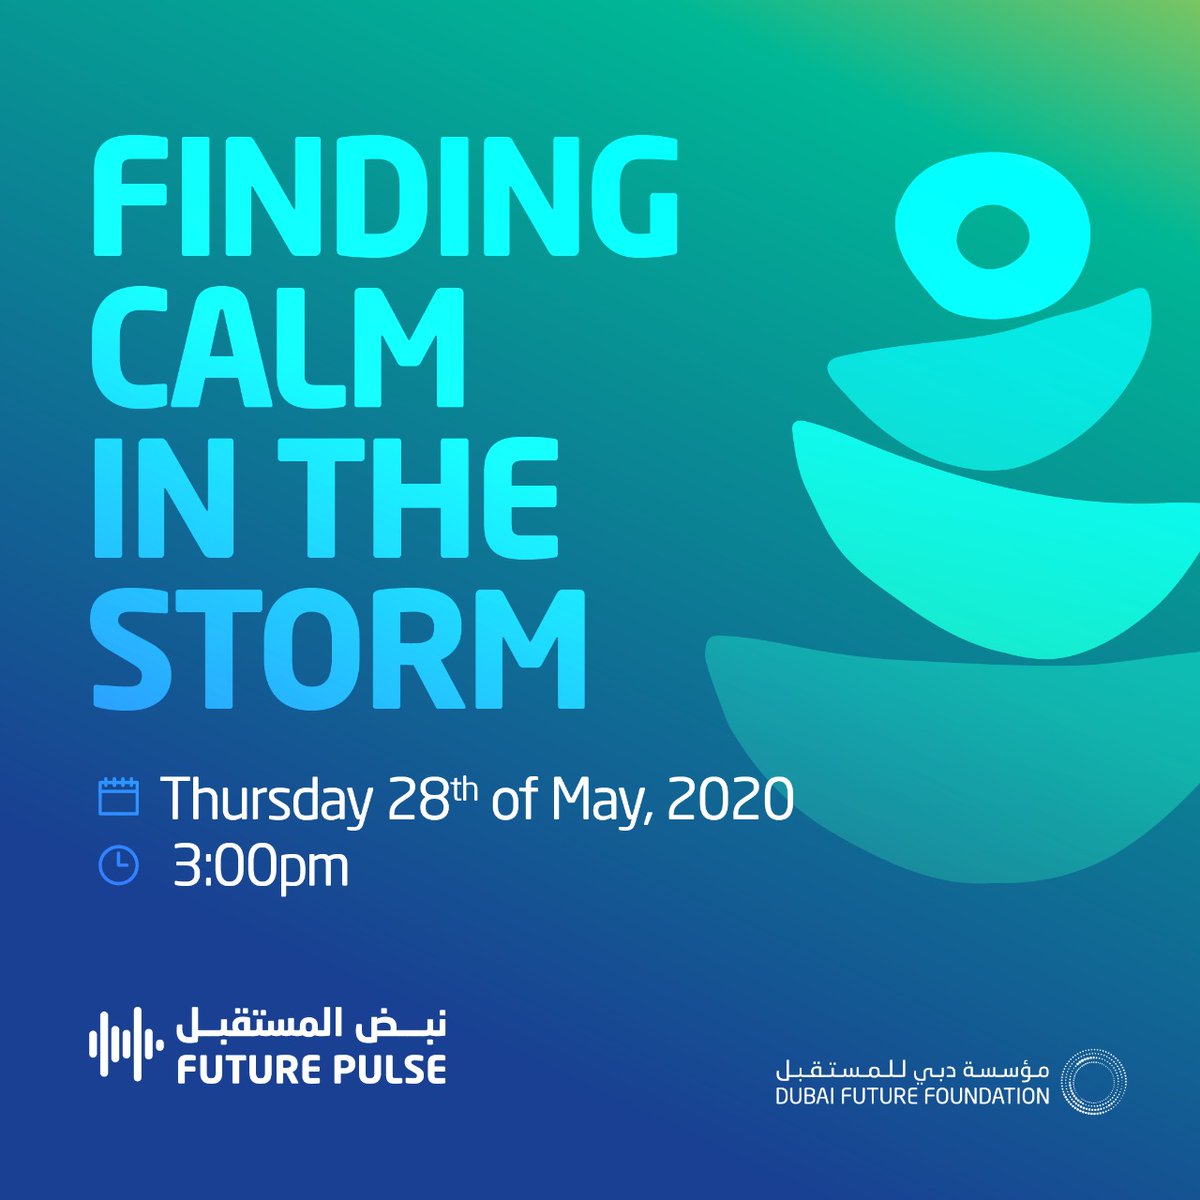 It’s more important than ever to practice mindfulness and connect with our feelings and emotions, as it allows us to move through uncertain times with more stability and calmness.

us02web.zoom.us/webinar/regist…

#DubaiFuture #WellnessTalk #Futurepulse